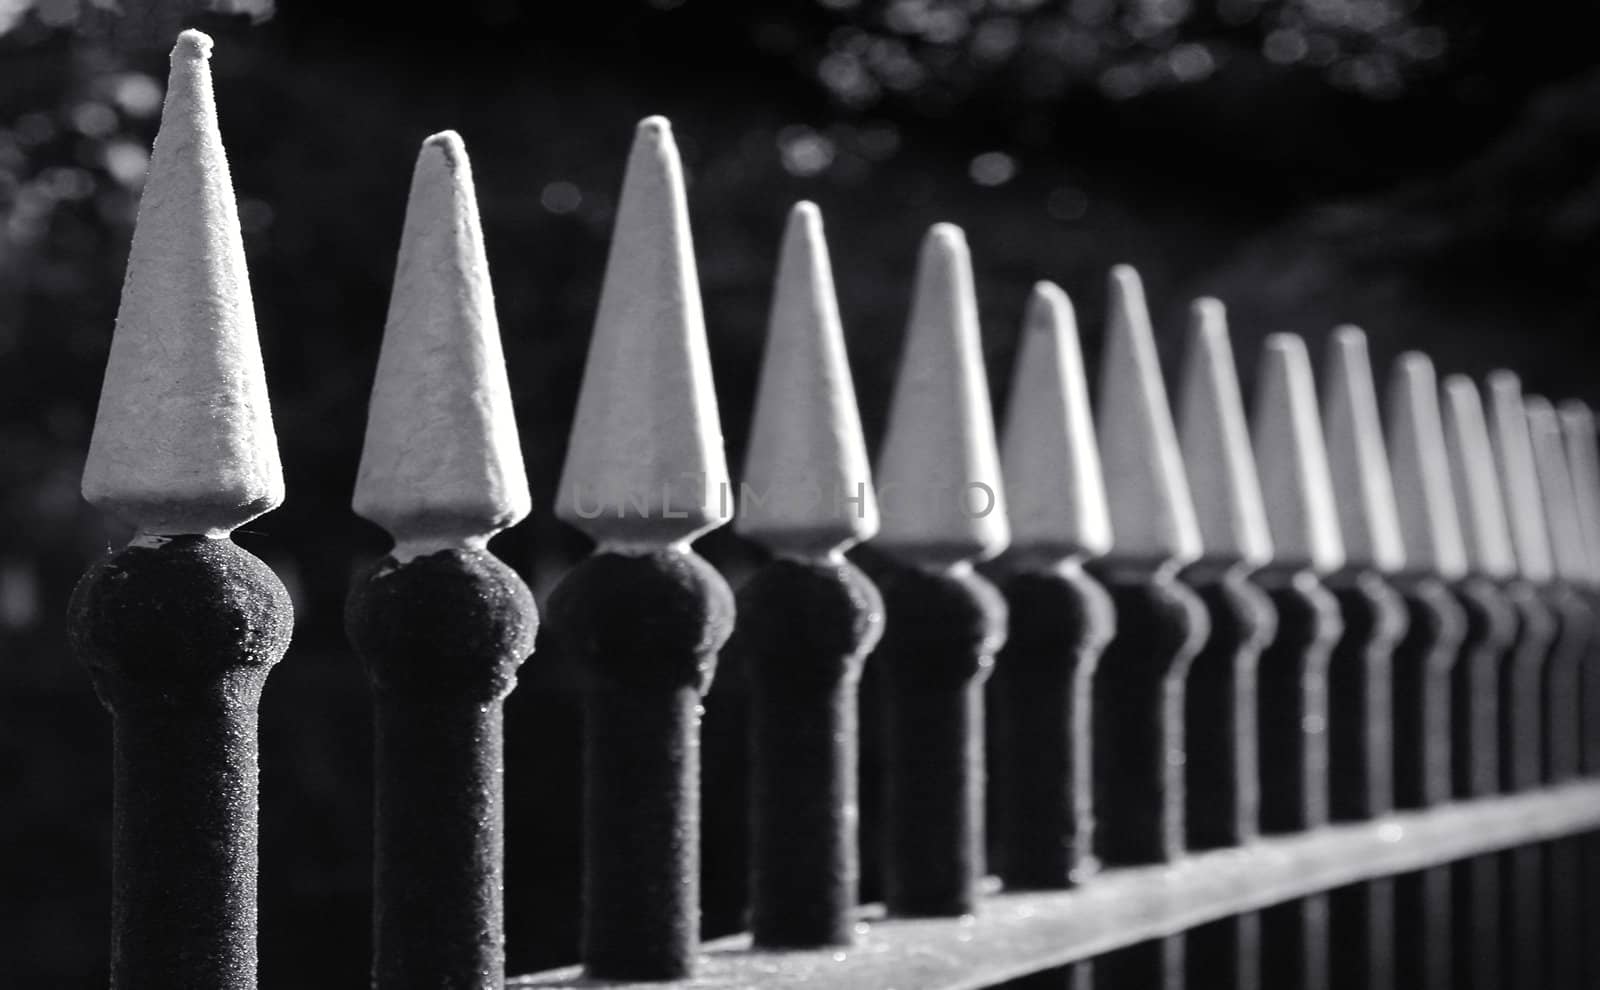 frosted metal railing spikes with diminishing perspective